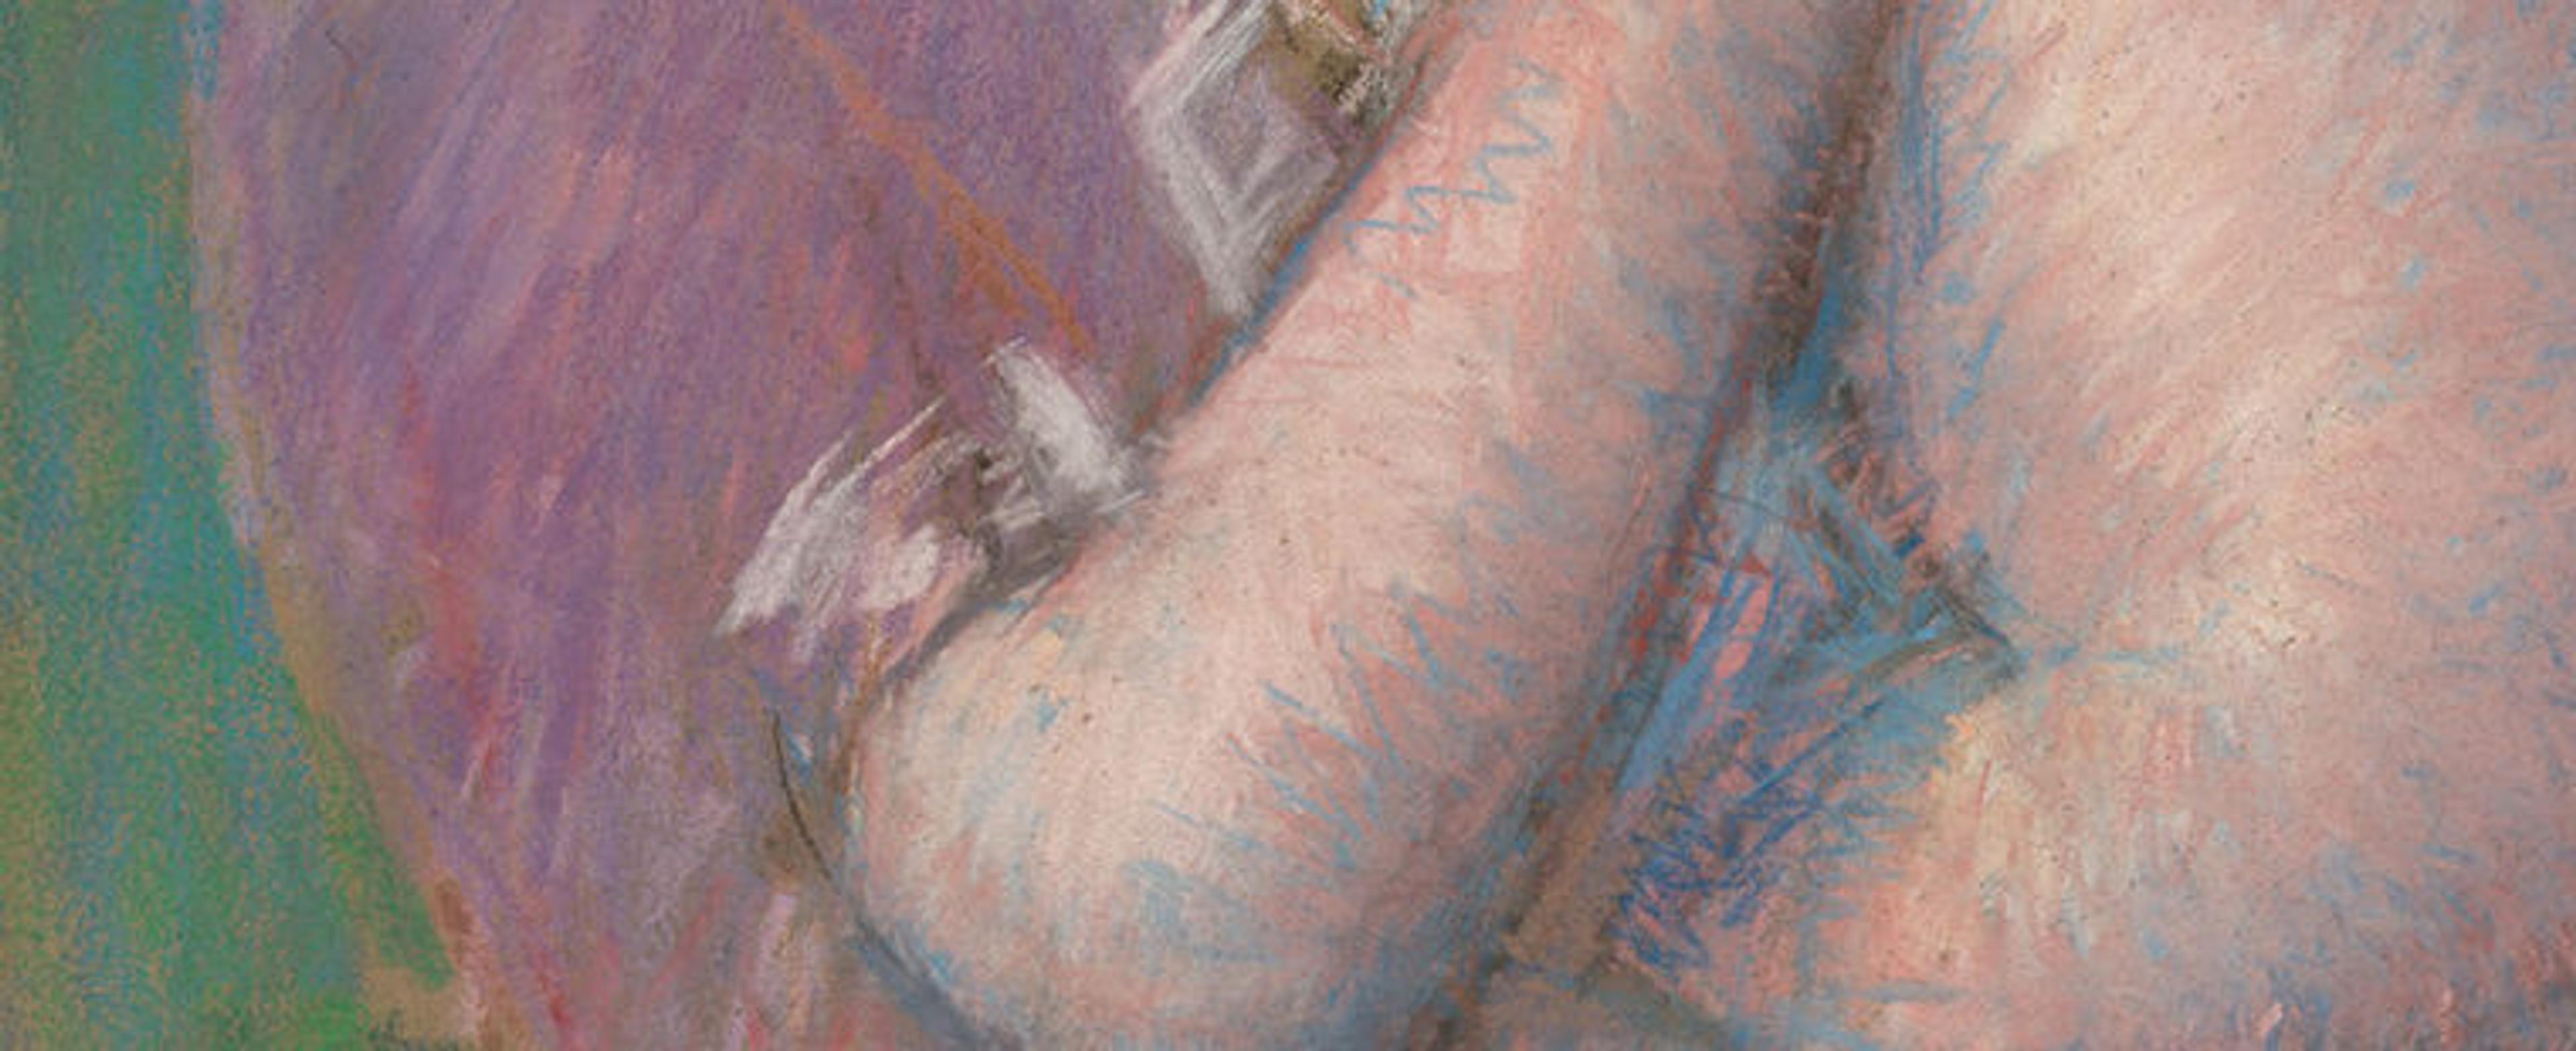 Detail showing complementary colors of flesh, dress, and background